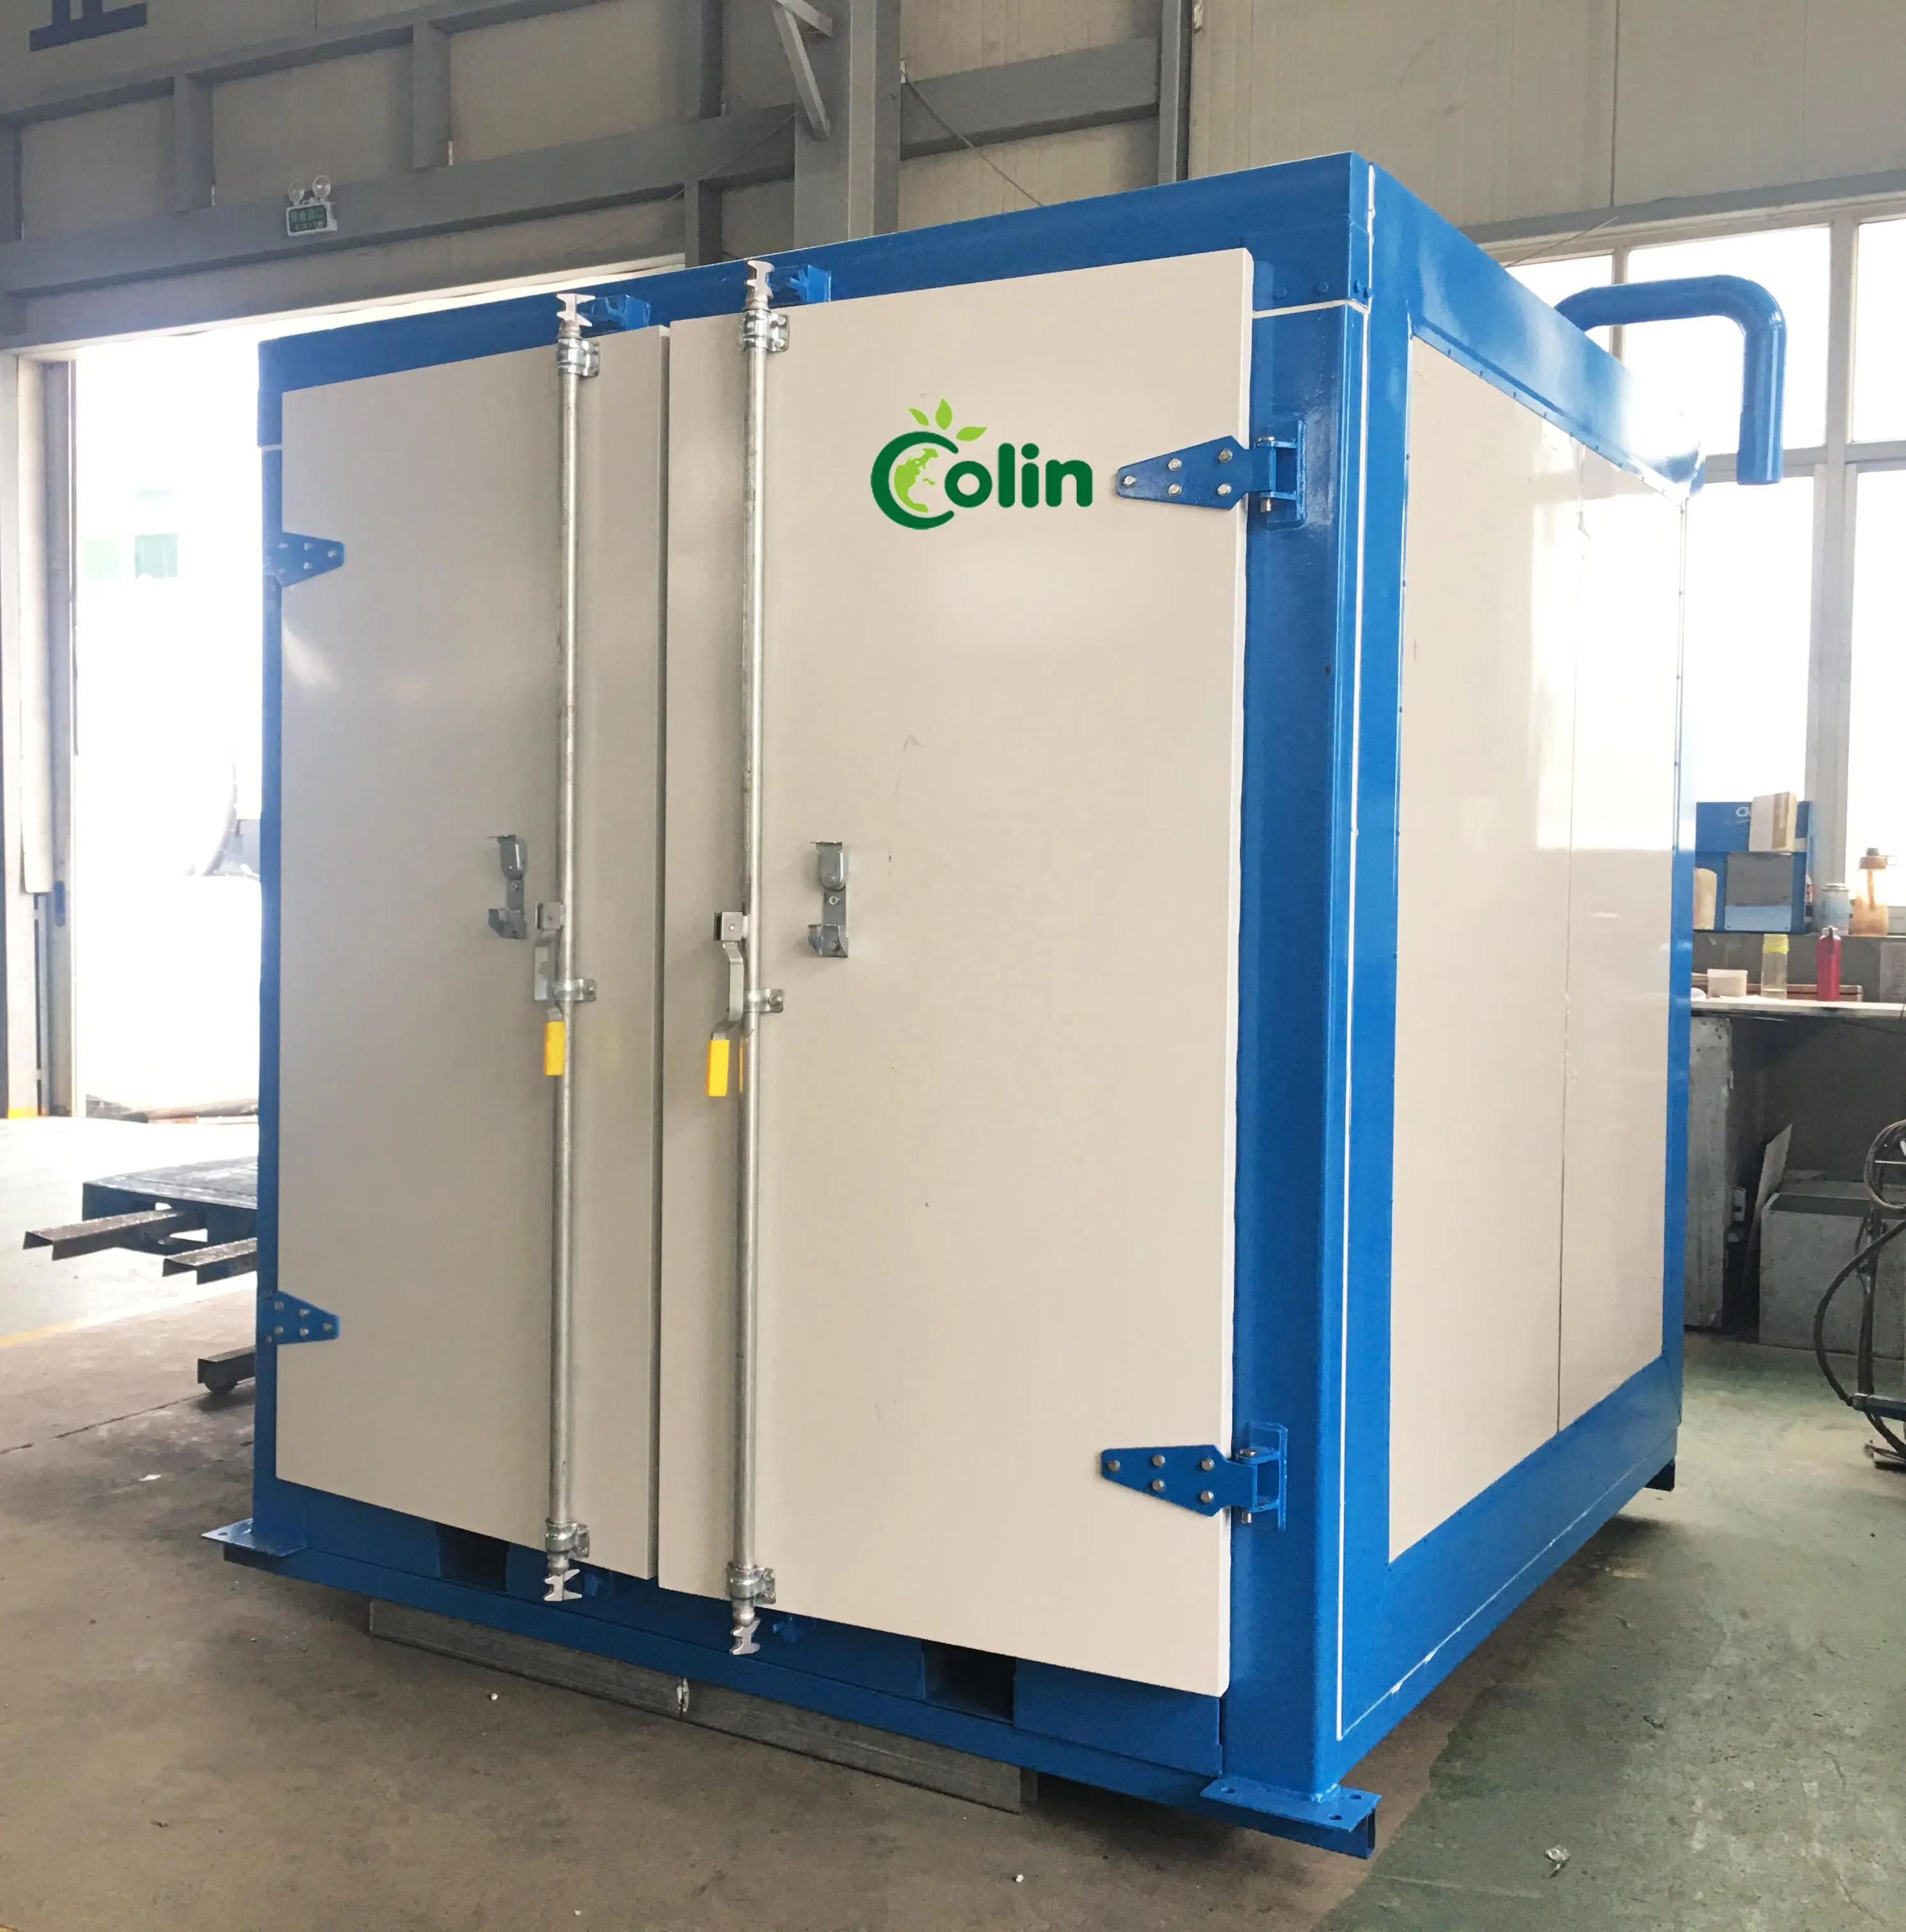 Small Electric LPG / GAS / Diesel Powder Coating Curing Oven for Industrial Aluminum workpiece Baking Paint Powder Coating